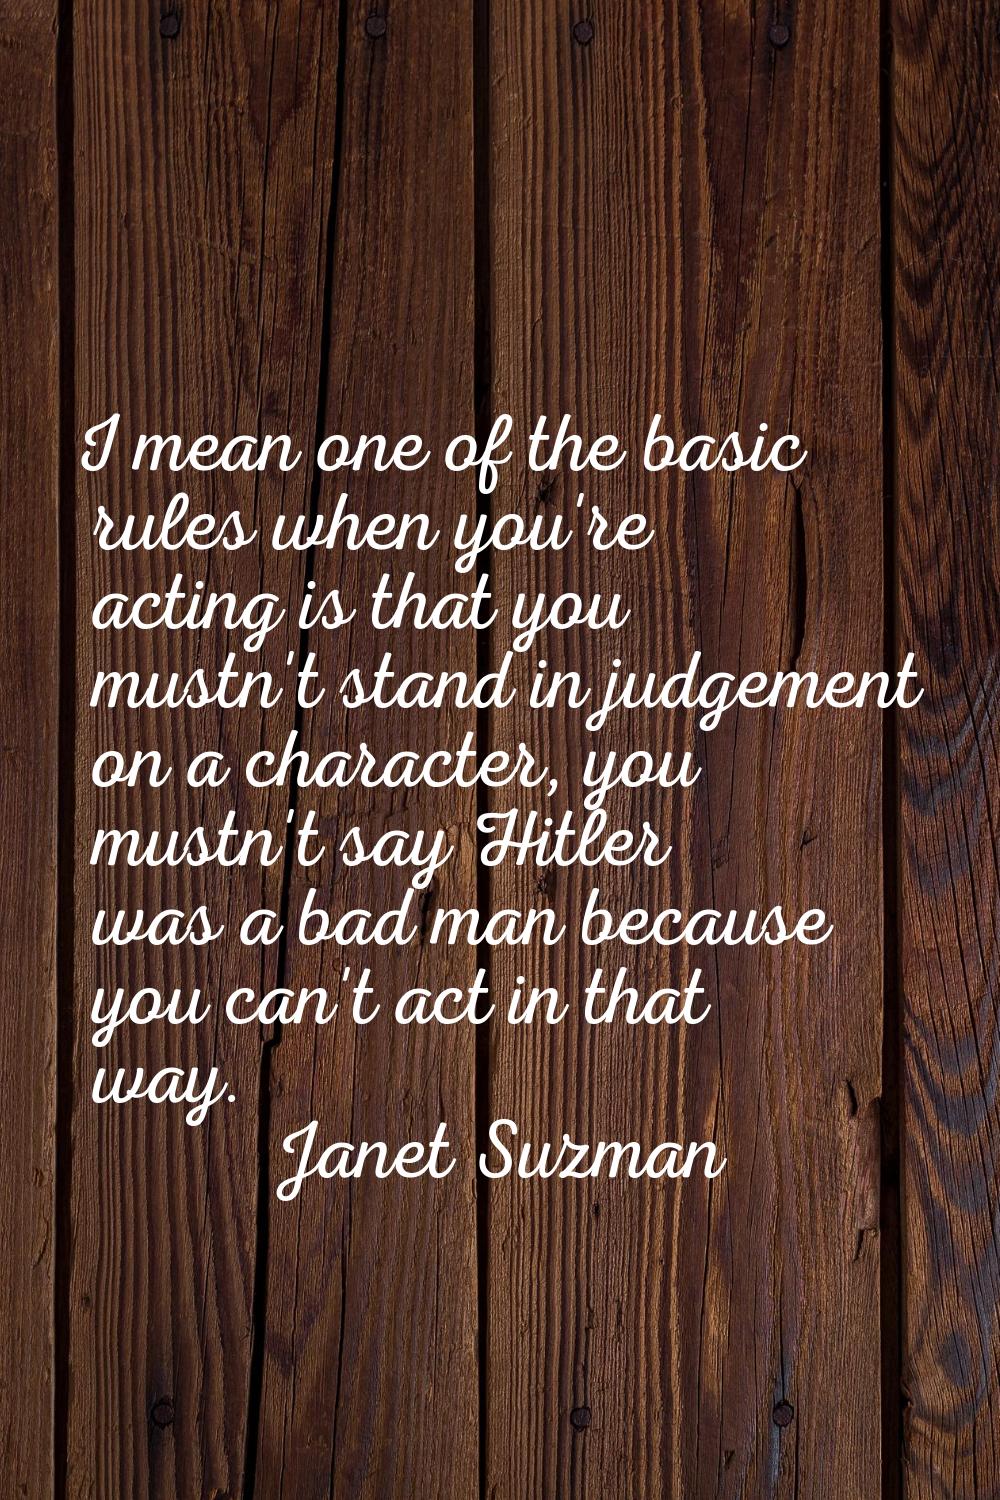 I mean one of the basic rules when you're acting is that you mustn't stand in judgement on a charac